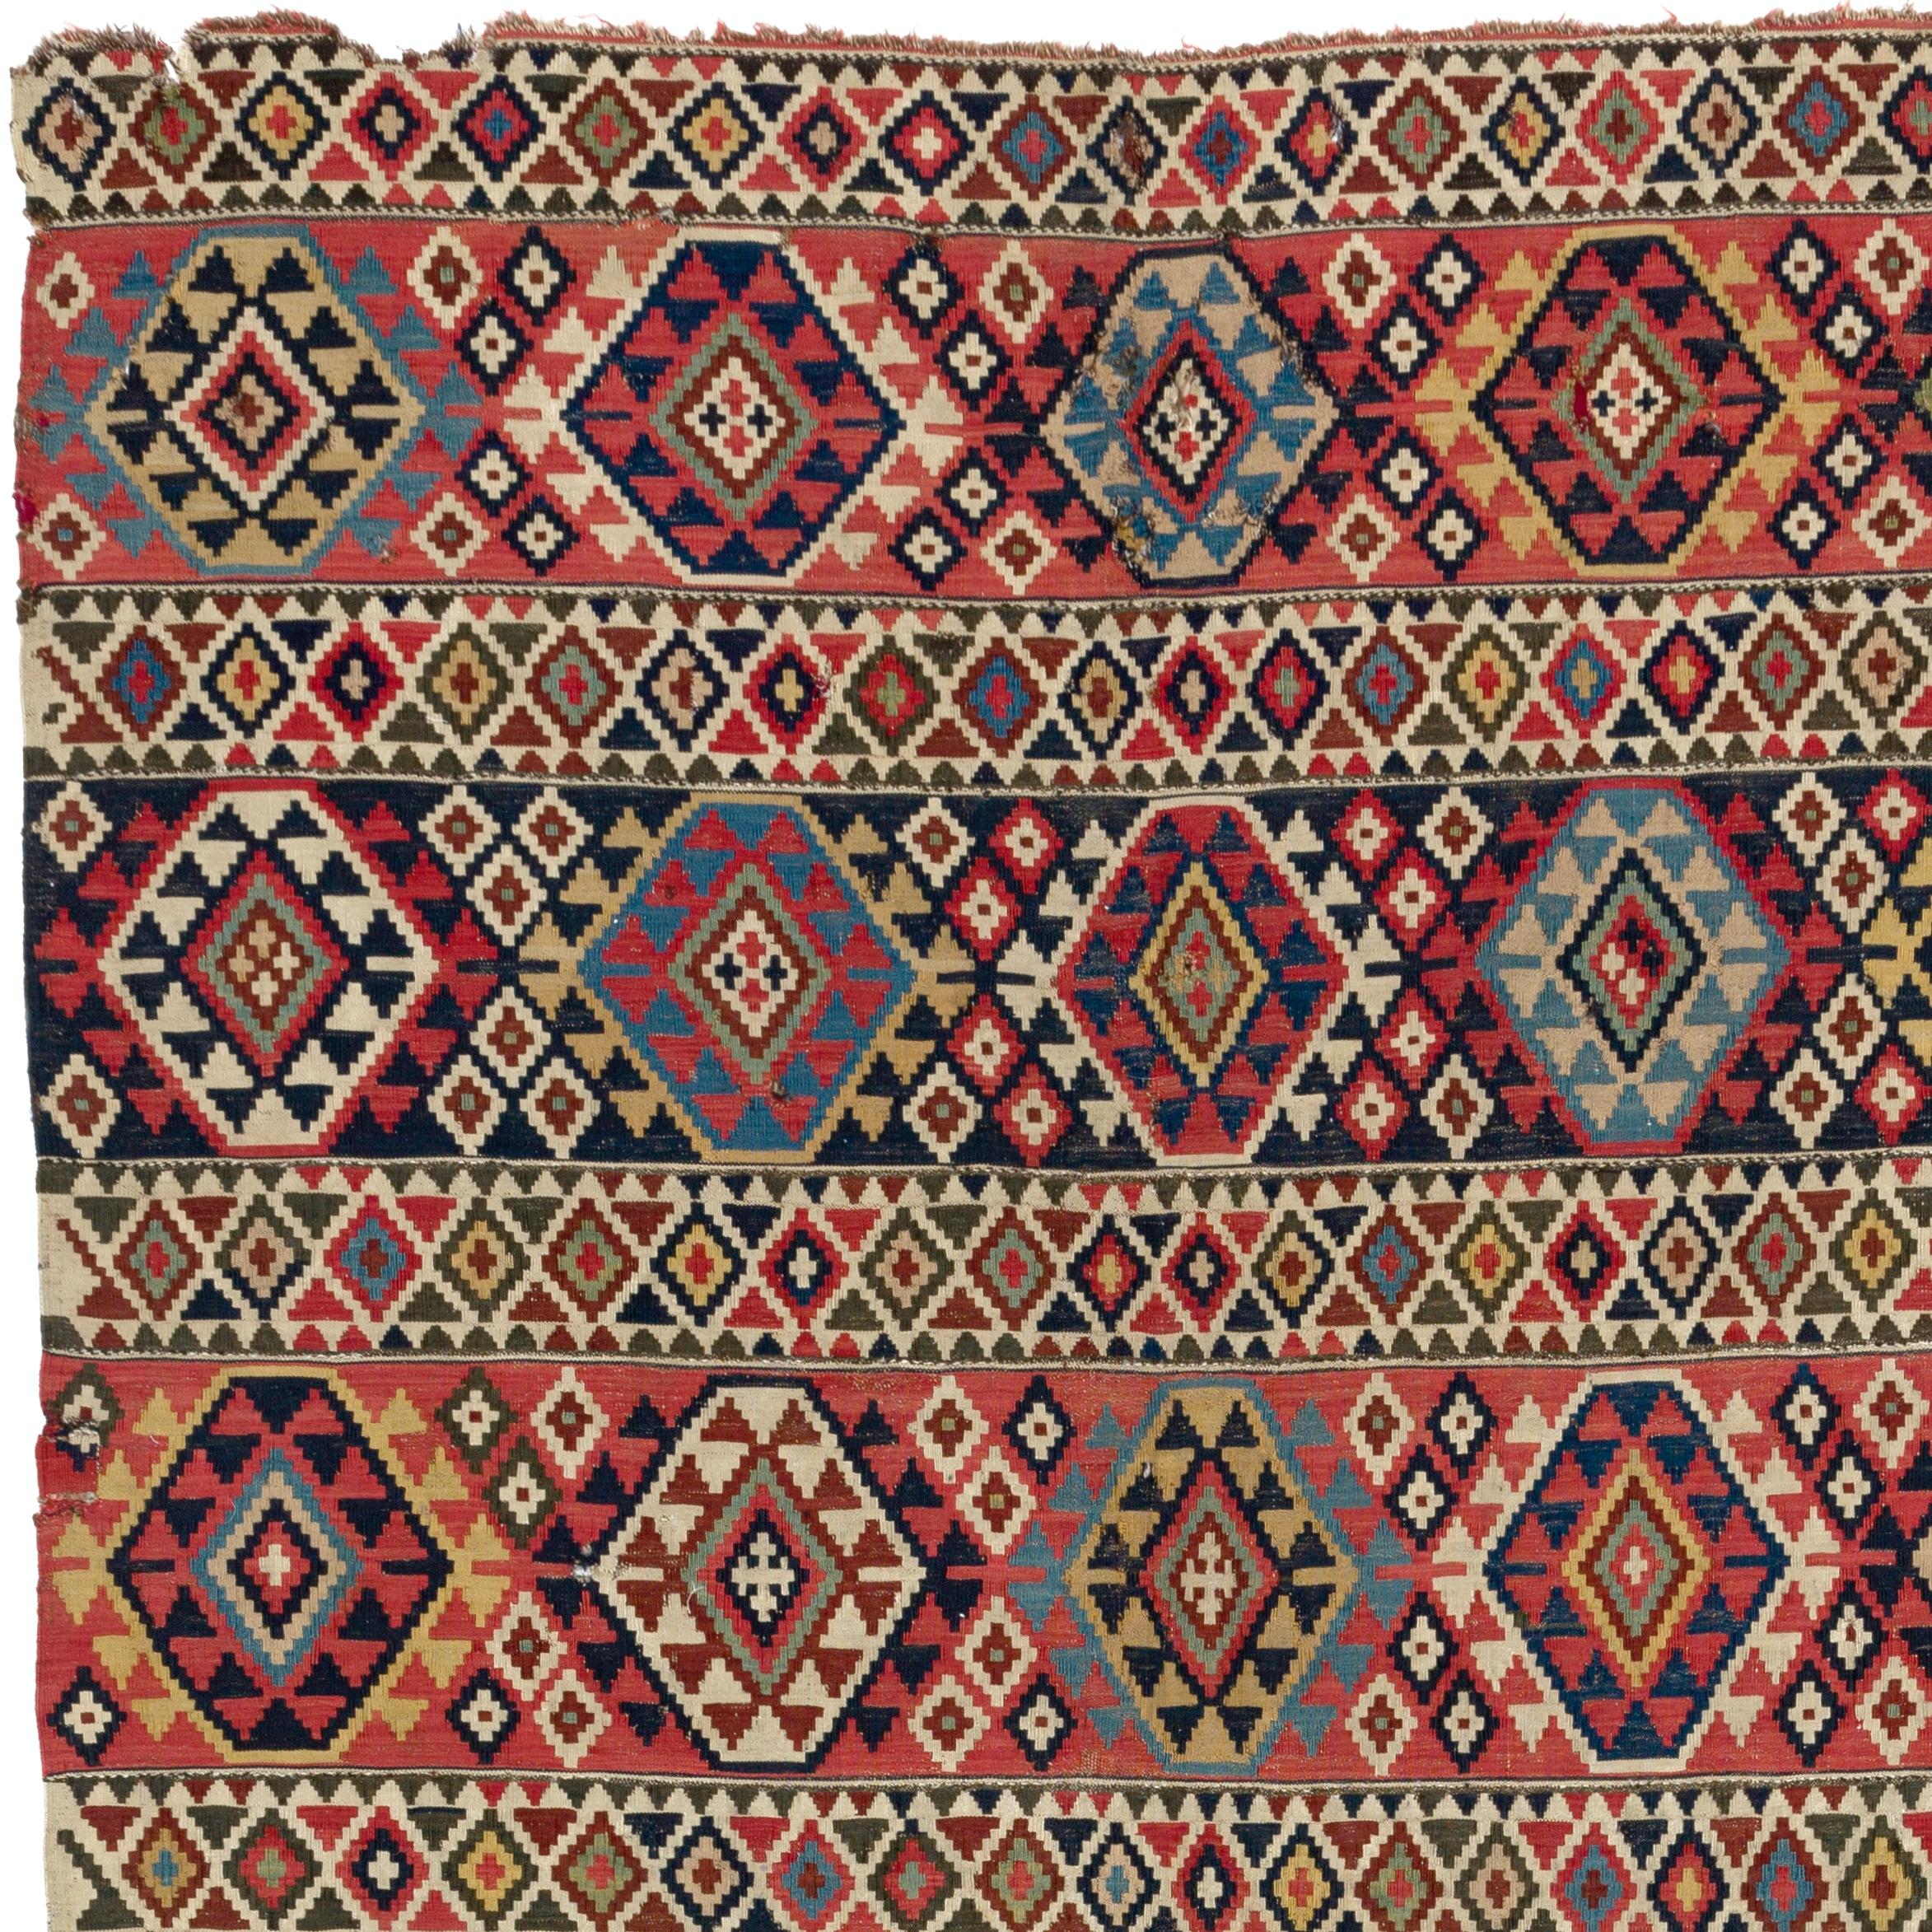 A rare antique Caucasian Shirvan Kilim (flat-woven rug) with wonderfully saturated natural dyes and beautiful geometric design. Very good condition. Sturdy and as clean as a brand new rug (deep washed professionally). Measures: 5.2 x 10 ft.